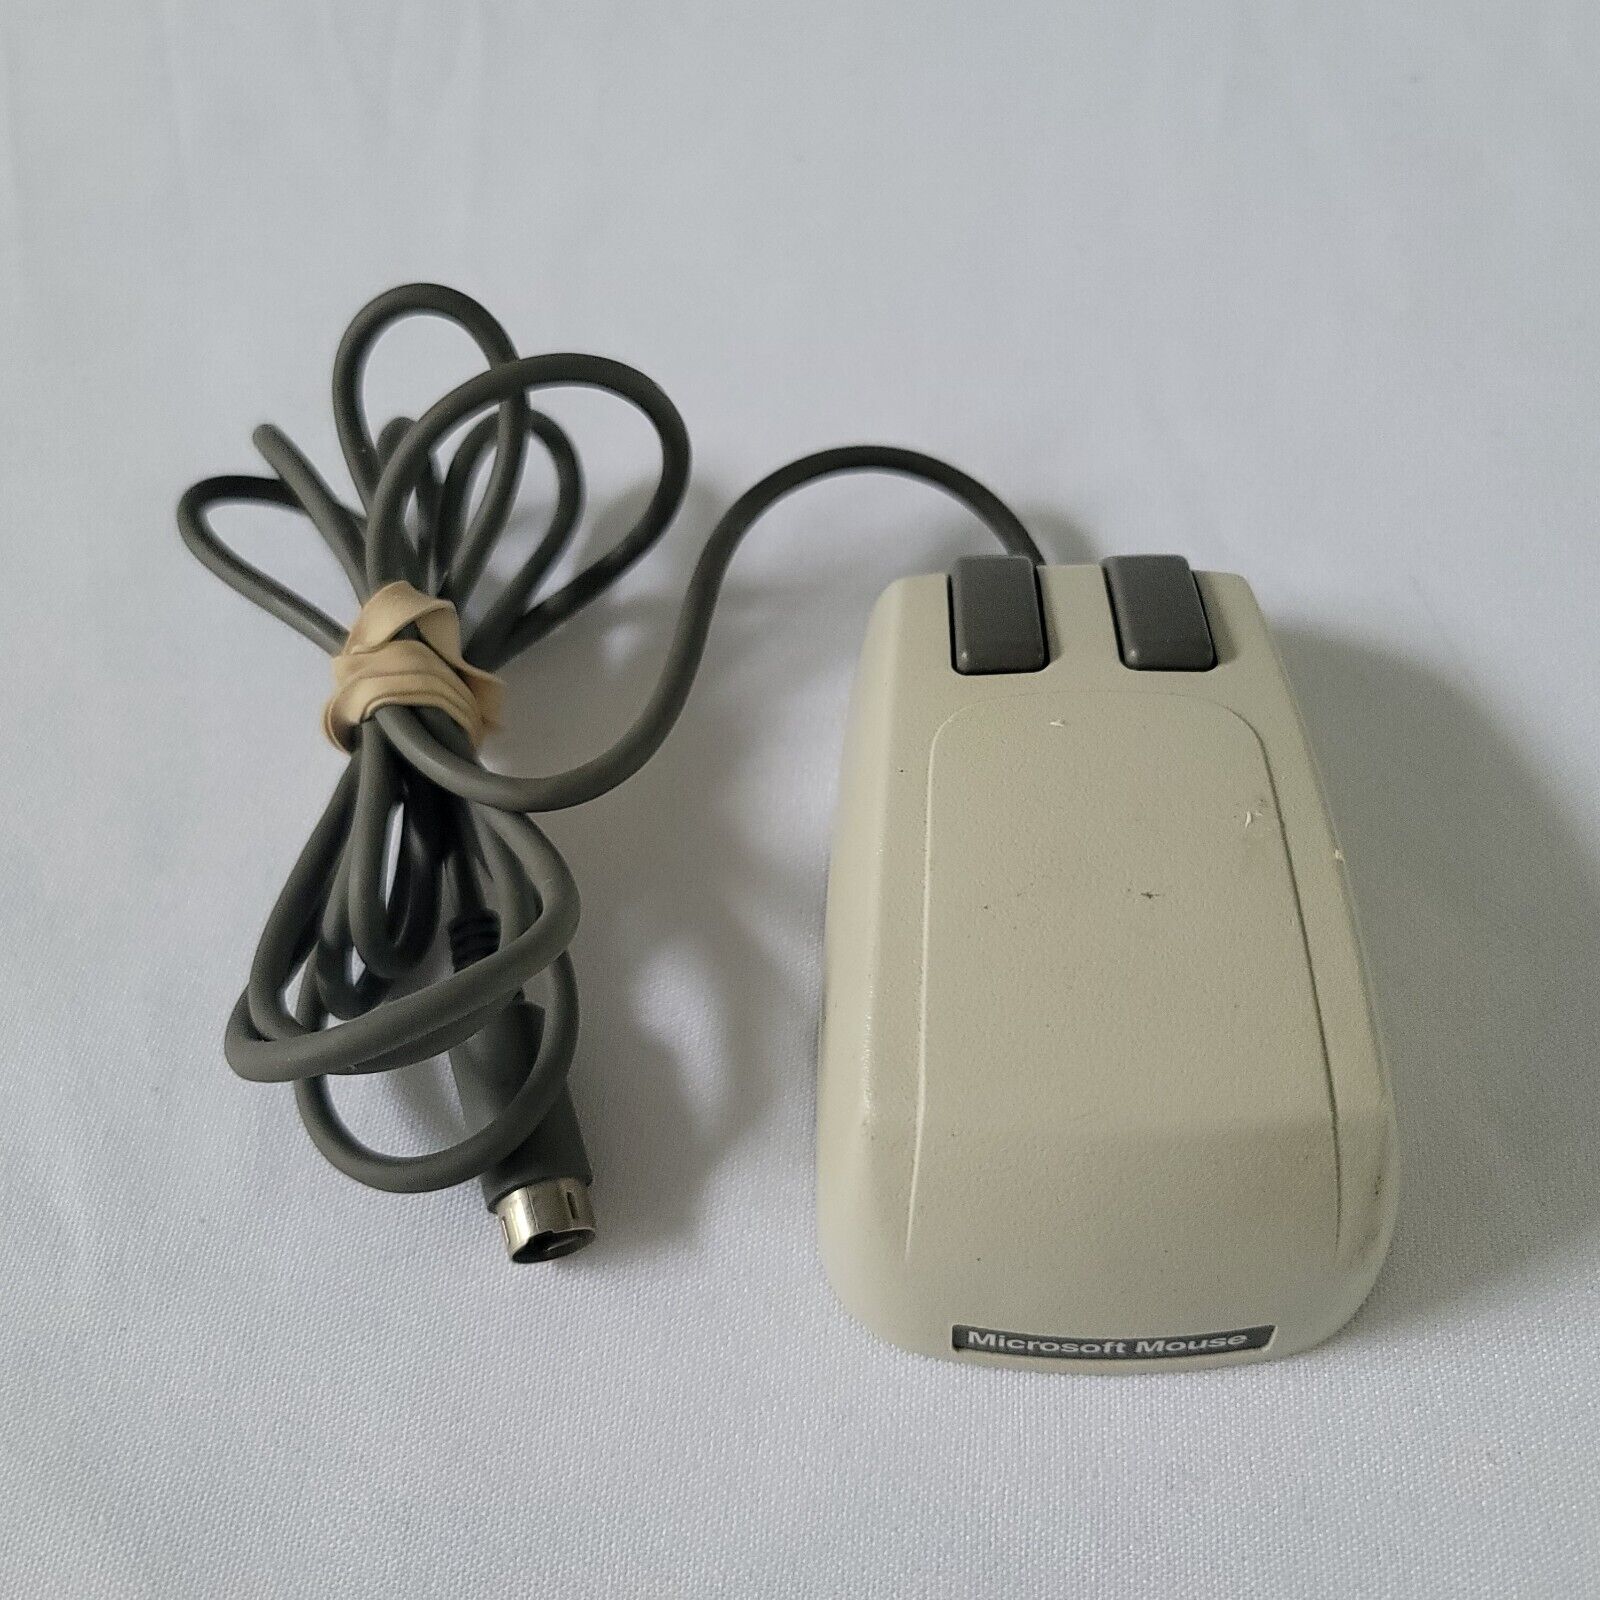 Vintage Rare Microsoft 2-Button 9-Pin Serial 1980's Computer Mouse UNTESTED